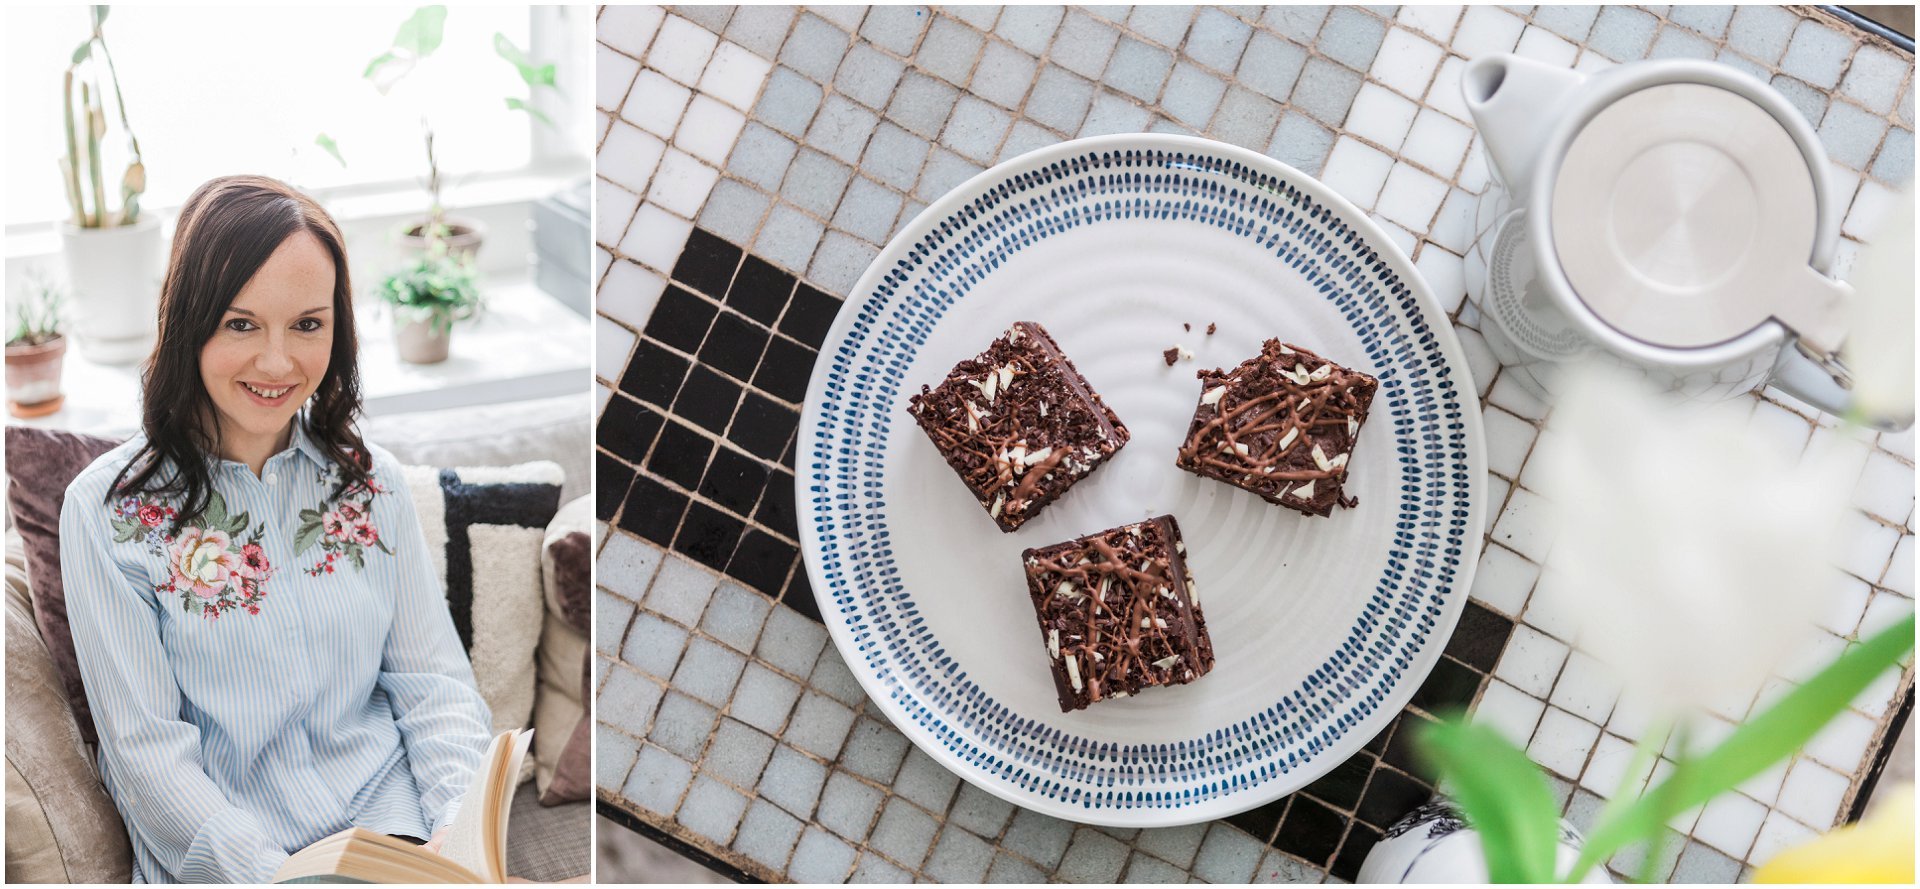 mini brand session with Erin Spurling at home with cake, image by AKP Brand Photographer AKP Branding Stories